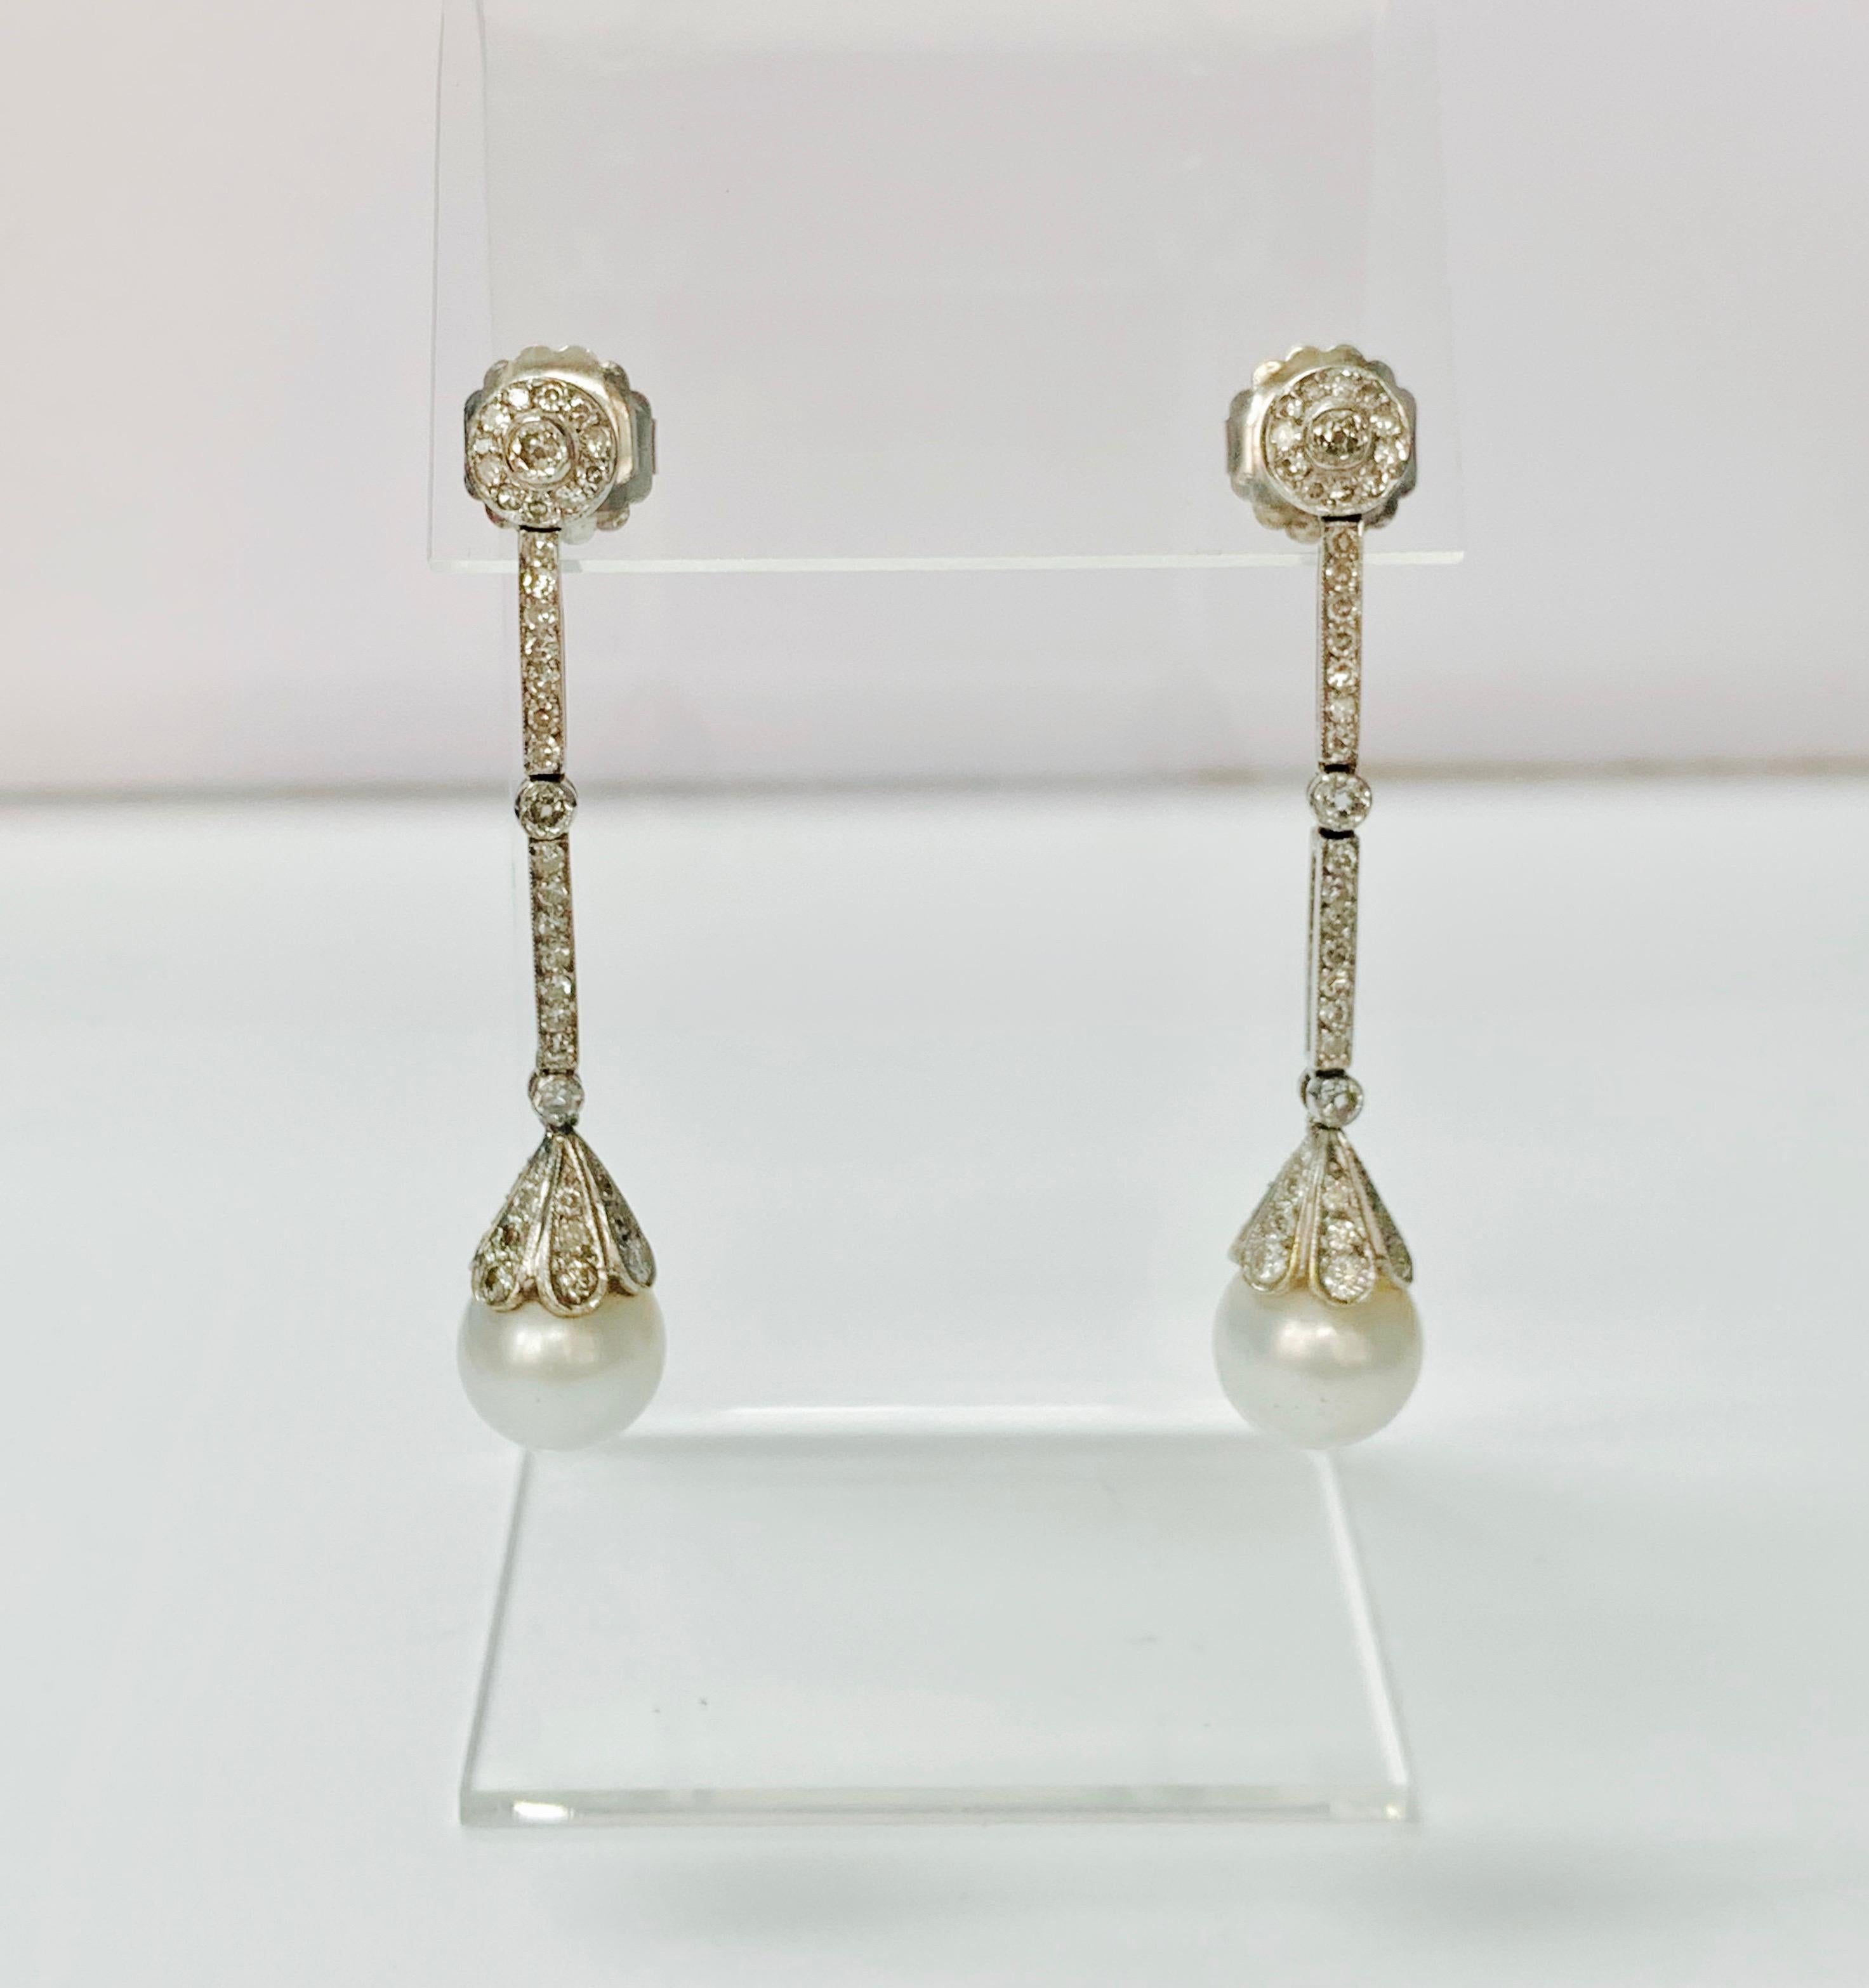 Diamond and south sea pearl chandelier earrings beautifully handmade in 18k white gold.
The details are as follows : 
Diamond weight: 2.75 carats ( I color and SI clarity ) 
Metal: 18K white gold 



